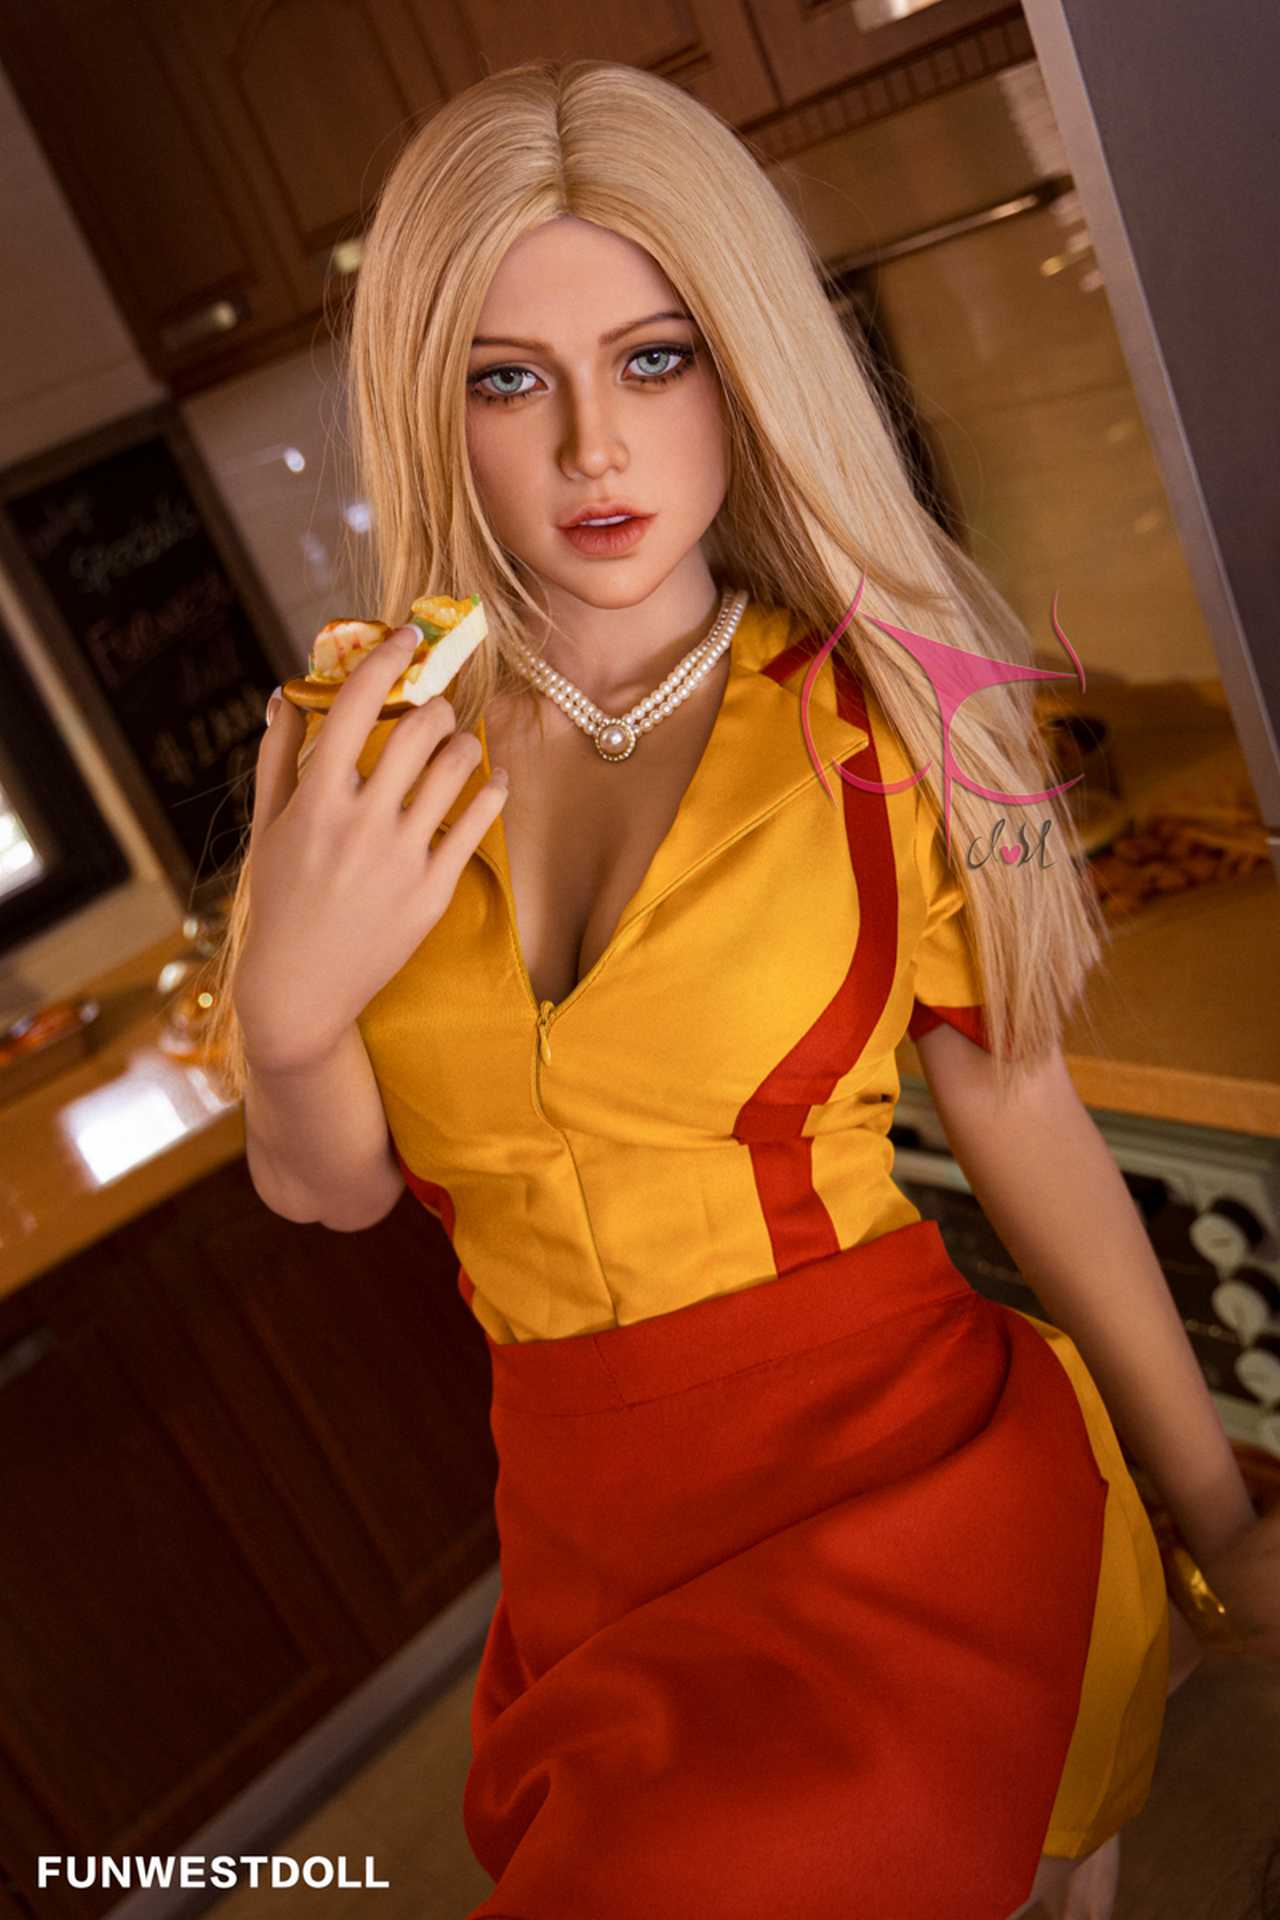 Funwest Kennedi: The 162cm Blonde Chef - A Lifelike Love Doll with F-Cup Features